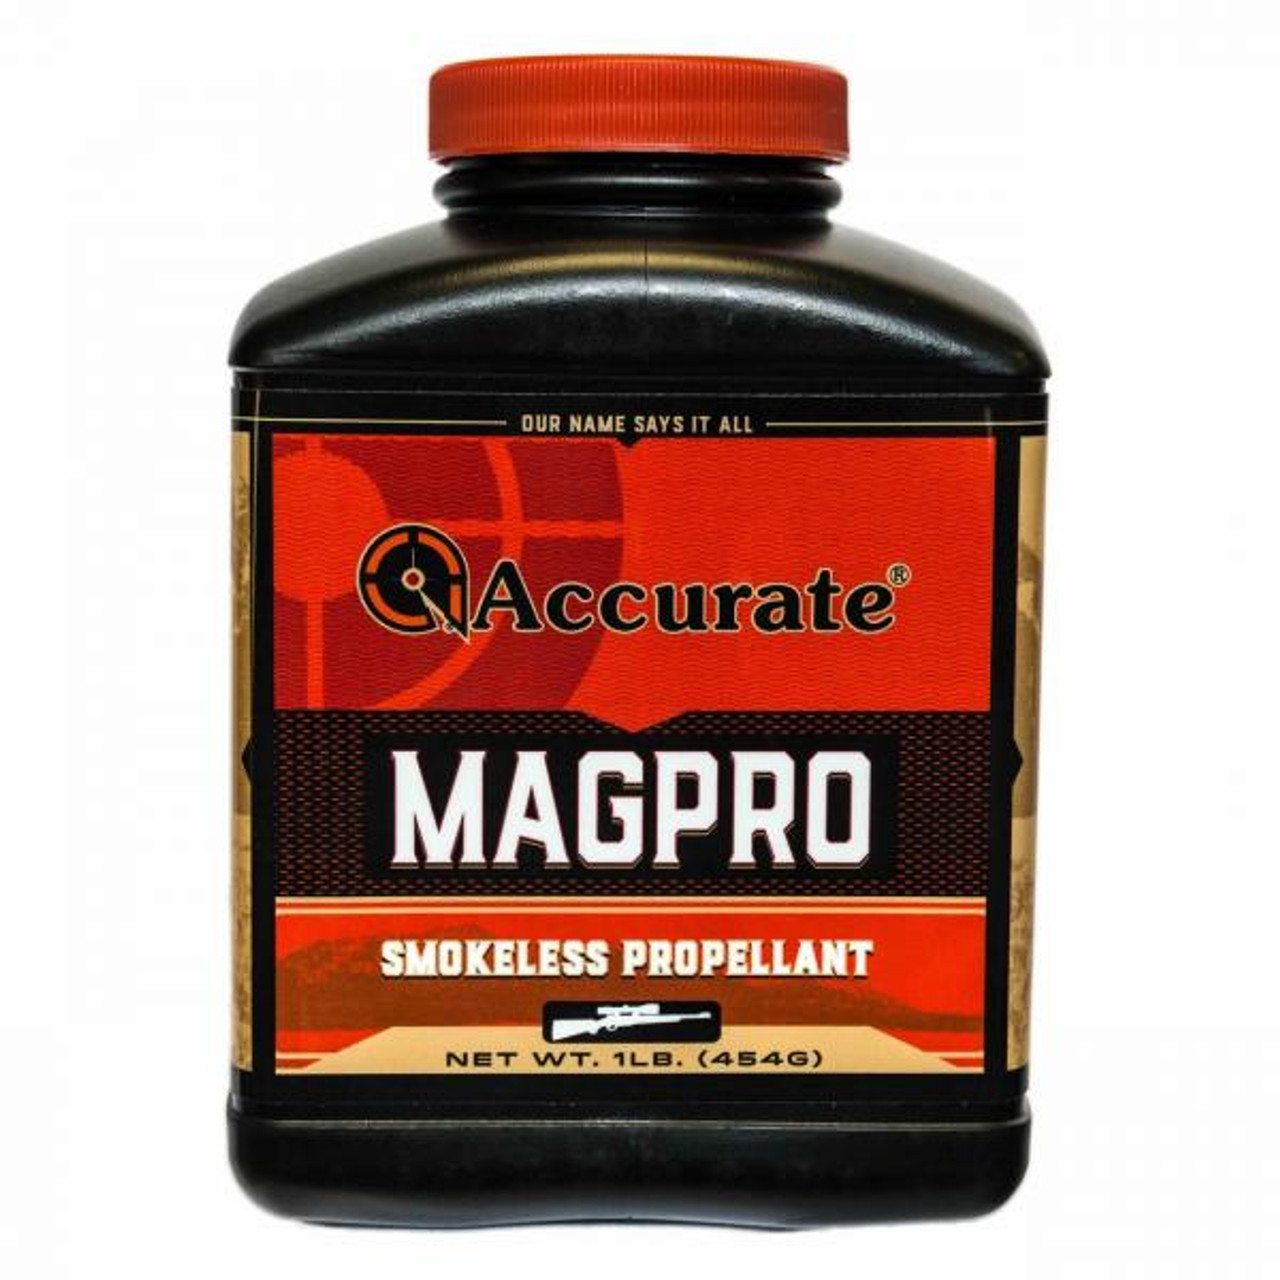 Accurate MAGPRO is a slow burning, double-base, spherical rifle powder developed specifically for the Short magnums of both Winchester (WSM) and Remington (SAUM). This powder excels in the 6.5 x 284, 270 WSM and the 7mm WSM. MAGPRO is an excellent choice for belted cartridges such as the 300 Win Mag. Consistent performance can be expected from the excellent metering properties of MAGPRO. Made in the USA.